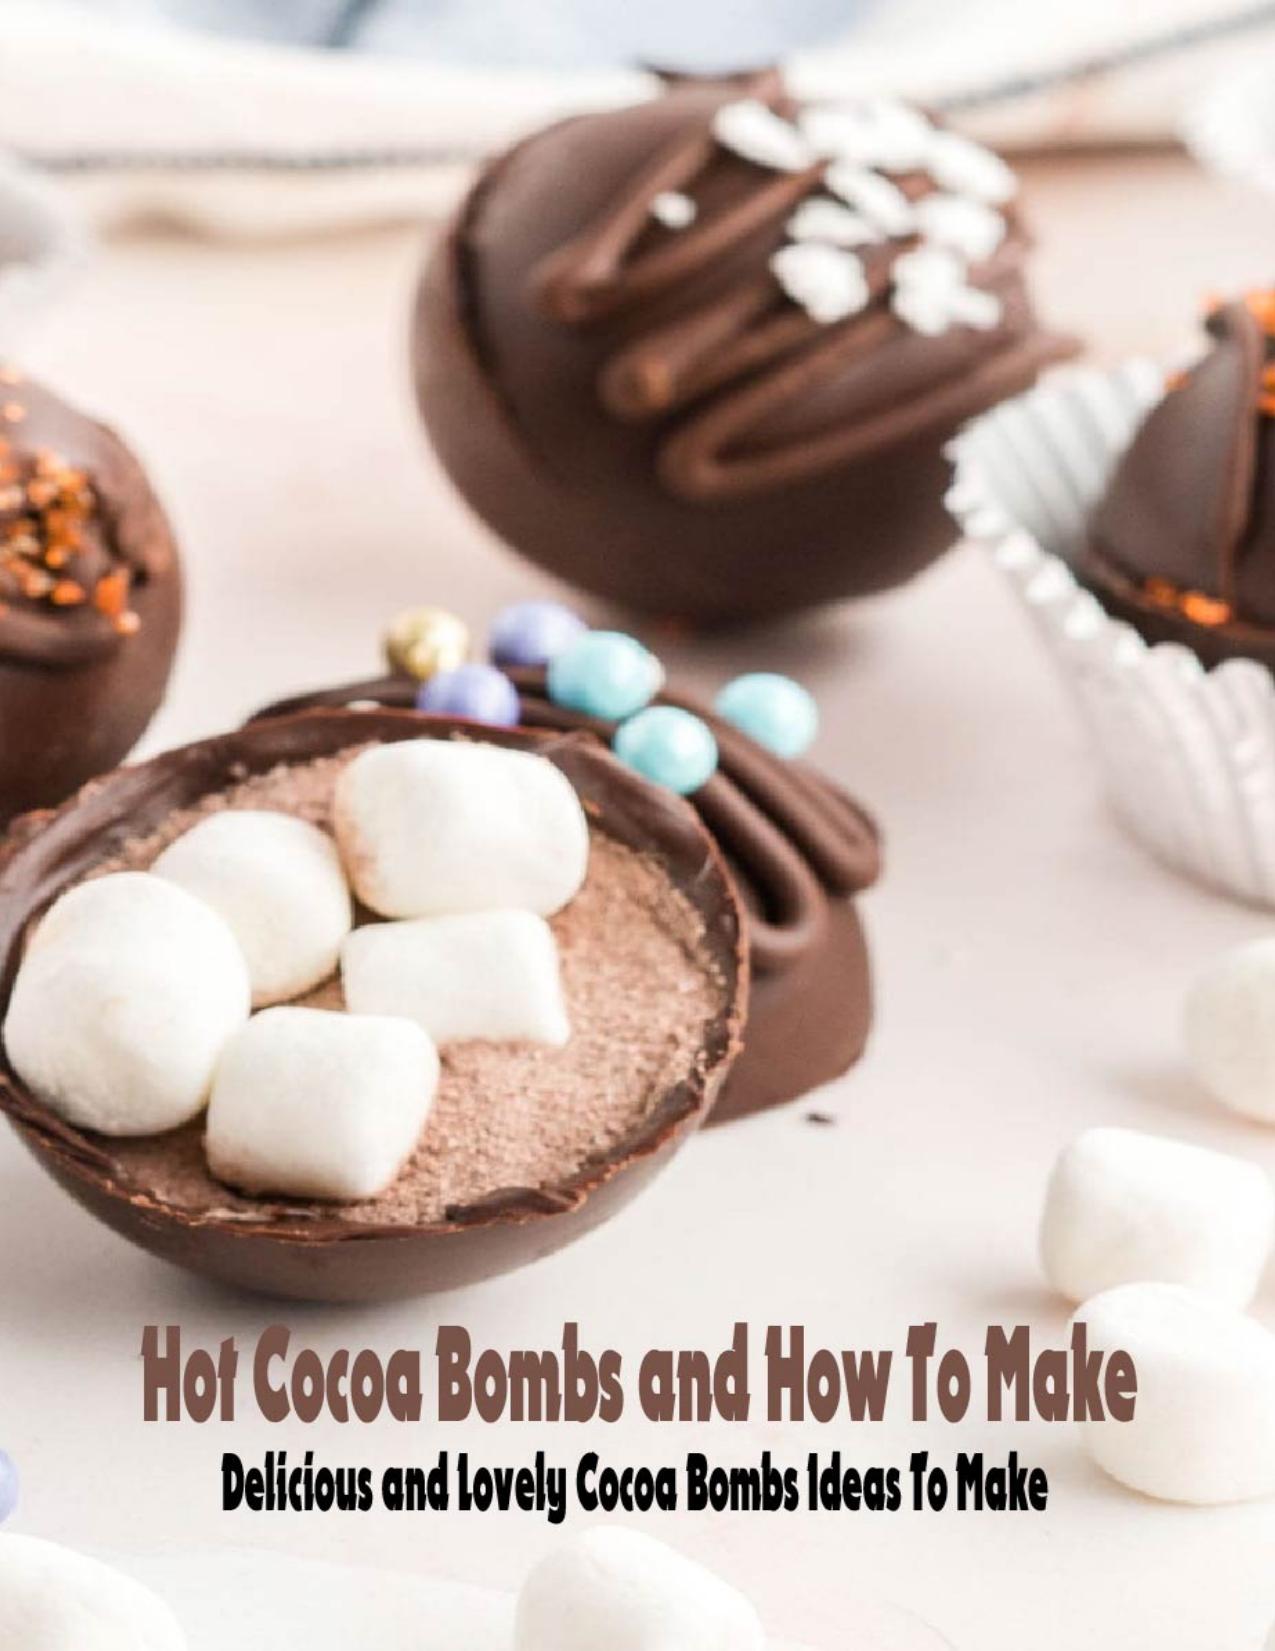 Hot Cocoa Bombs and How To Make: Delicious and Lovely Cocoa Bombs Ideas To Make: Bathroom Craft by Carrie Jones